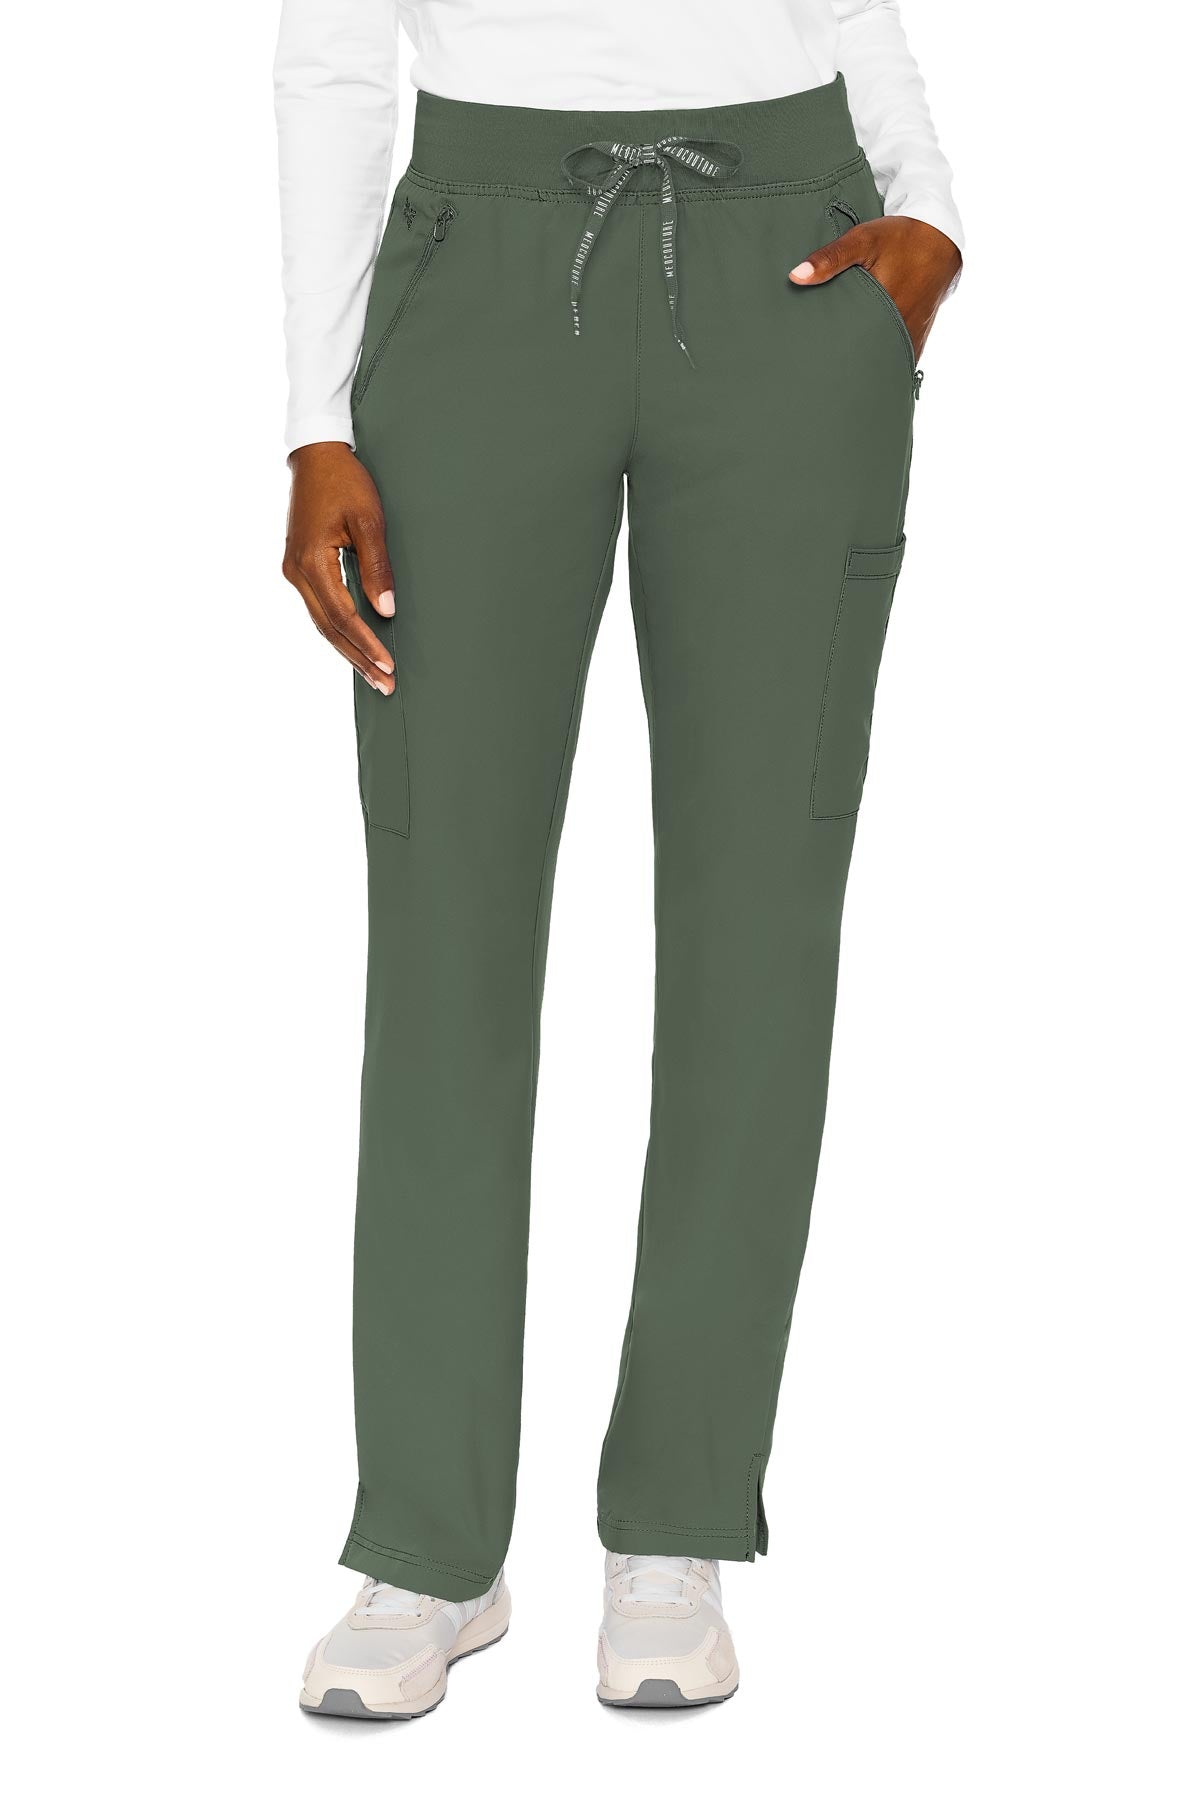 Med Couture Petite Scrub Pants Insight Zipper Pocket Pant in Olive at Parker's Clothing and Shoes